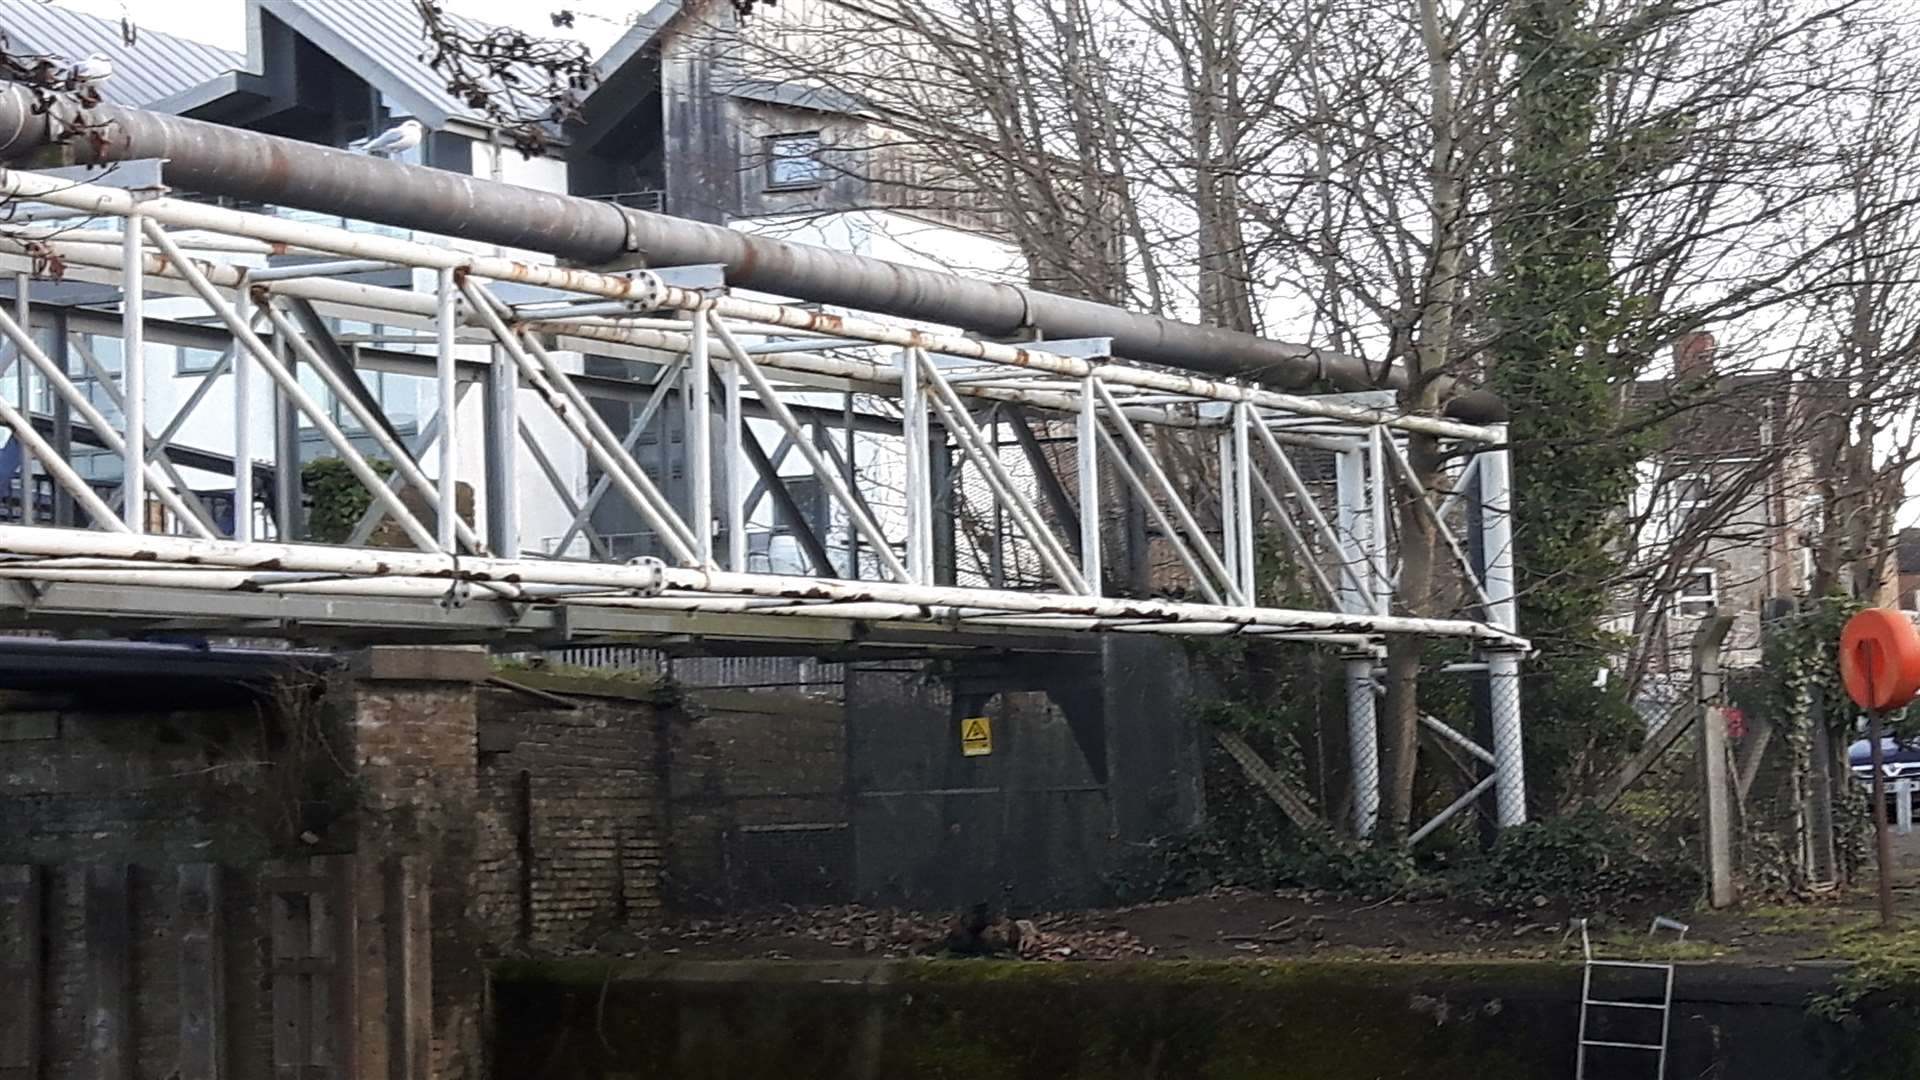 Today, the view of the footbridge over the river is obscured by a secondary utility bridge when seen from upriver on the Fant side